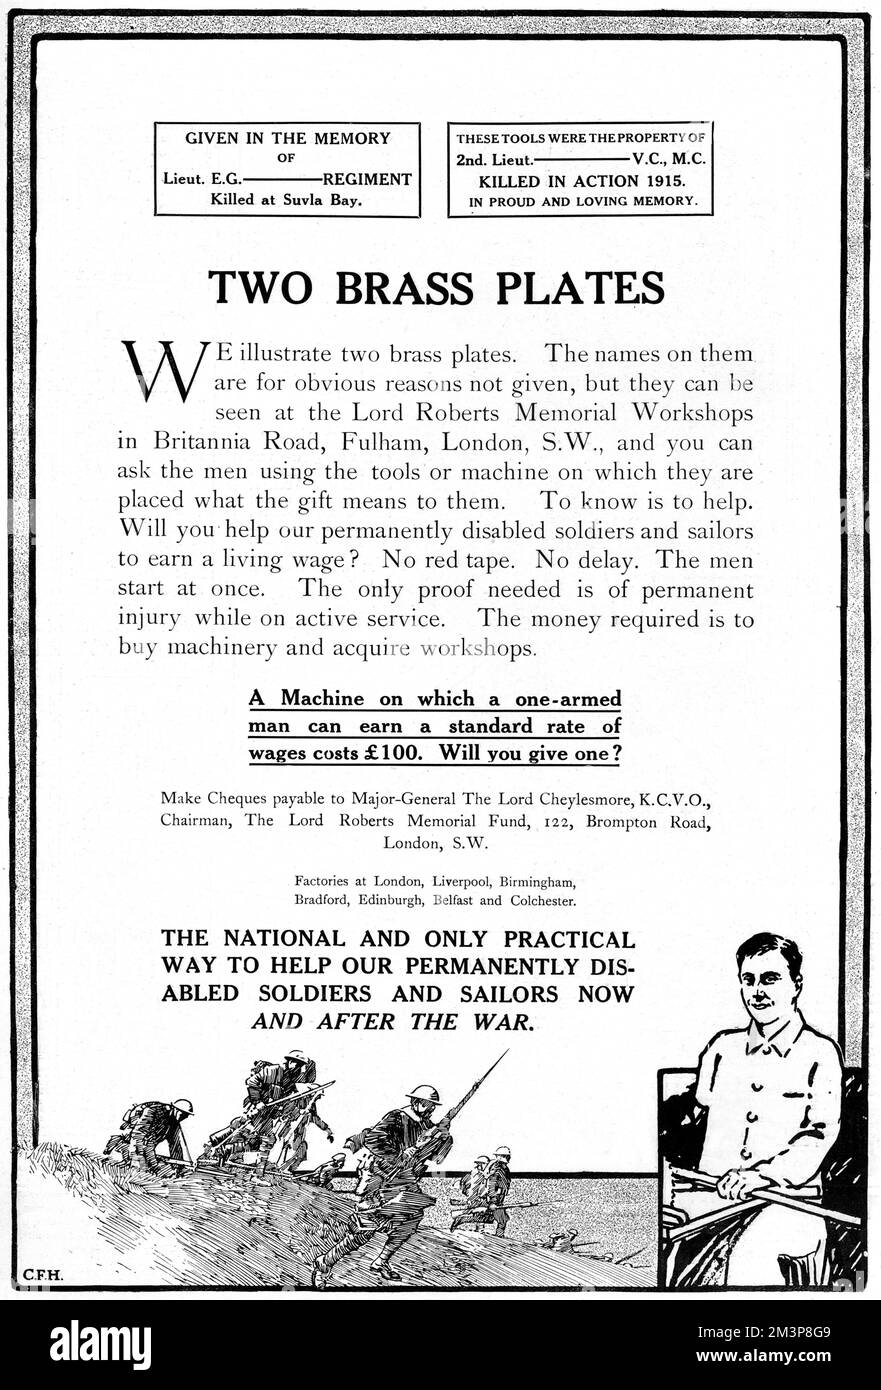 Advertisement asking for contributions to buy machinery and acquire workshops where wounded soldiers could learn new skills and rehabilitate at the Lord Roberts Memorial Workshops in Britannia Road, Fulham, London.       Date: 1917 Stock Photo